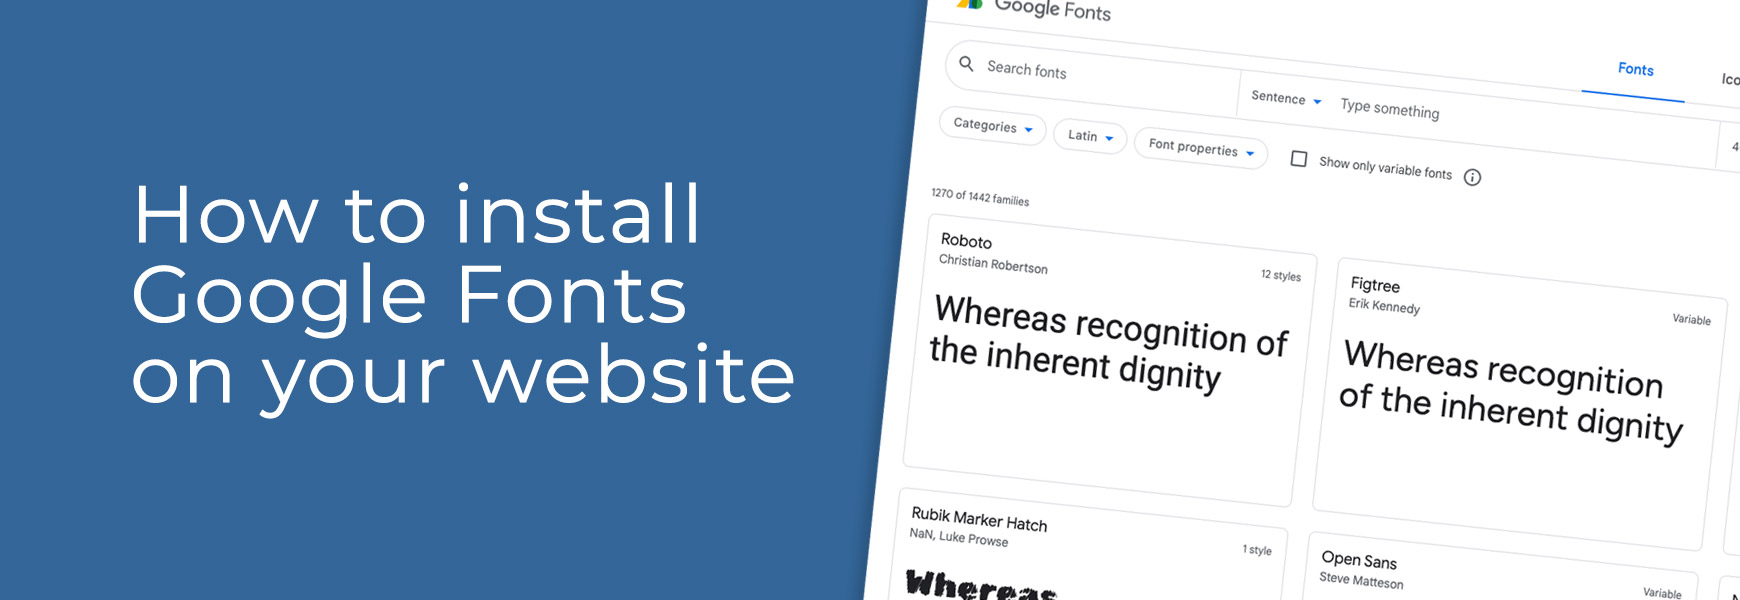 How to install Google Fonts on your website